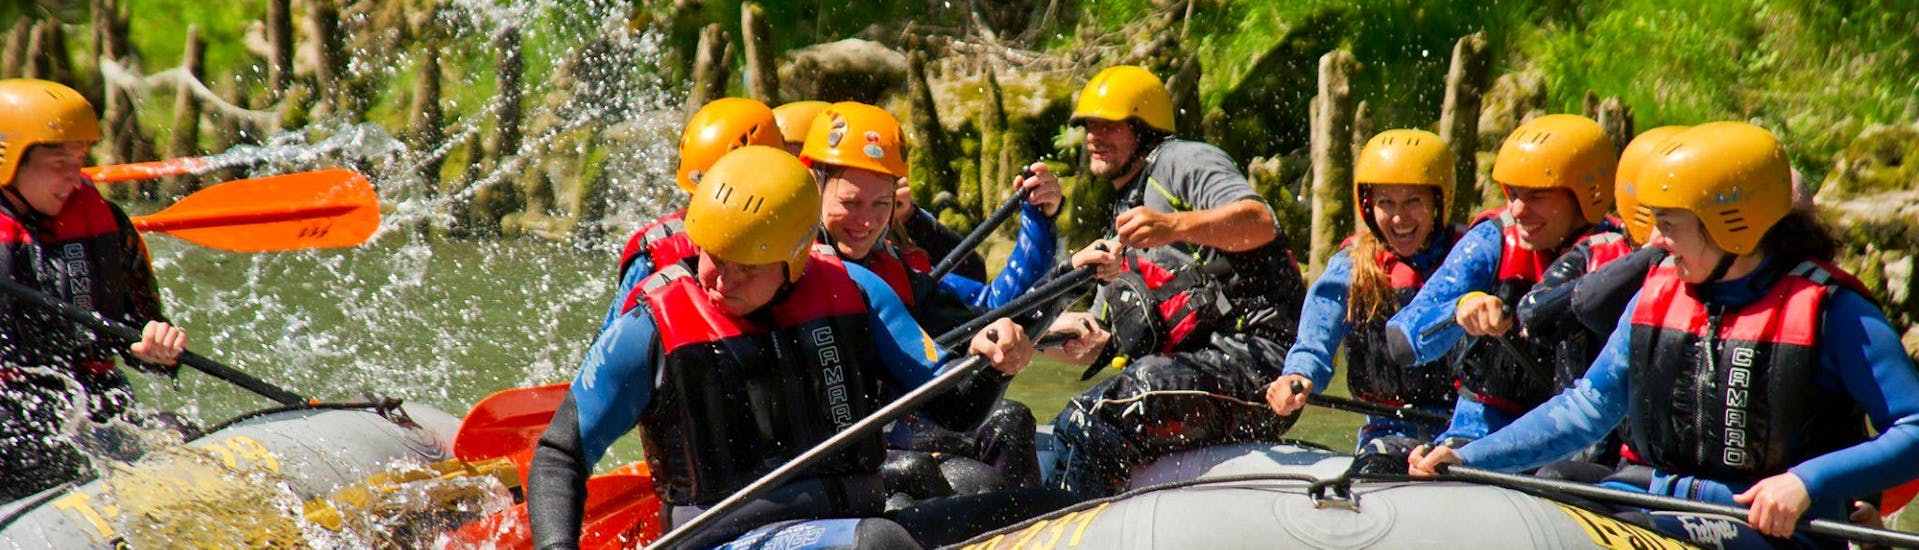 A boat full of people during Rafting on the Tiroler Ache River for Families in Kirchdorf with Mountain High Adventure Center Tirol.